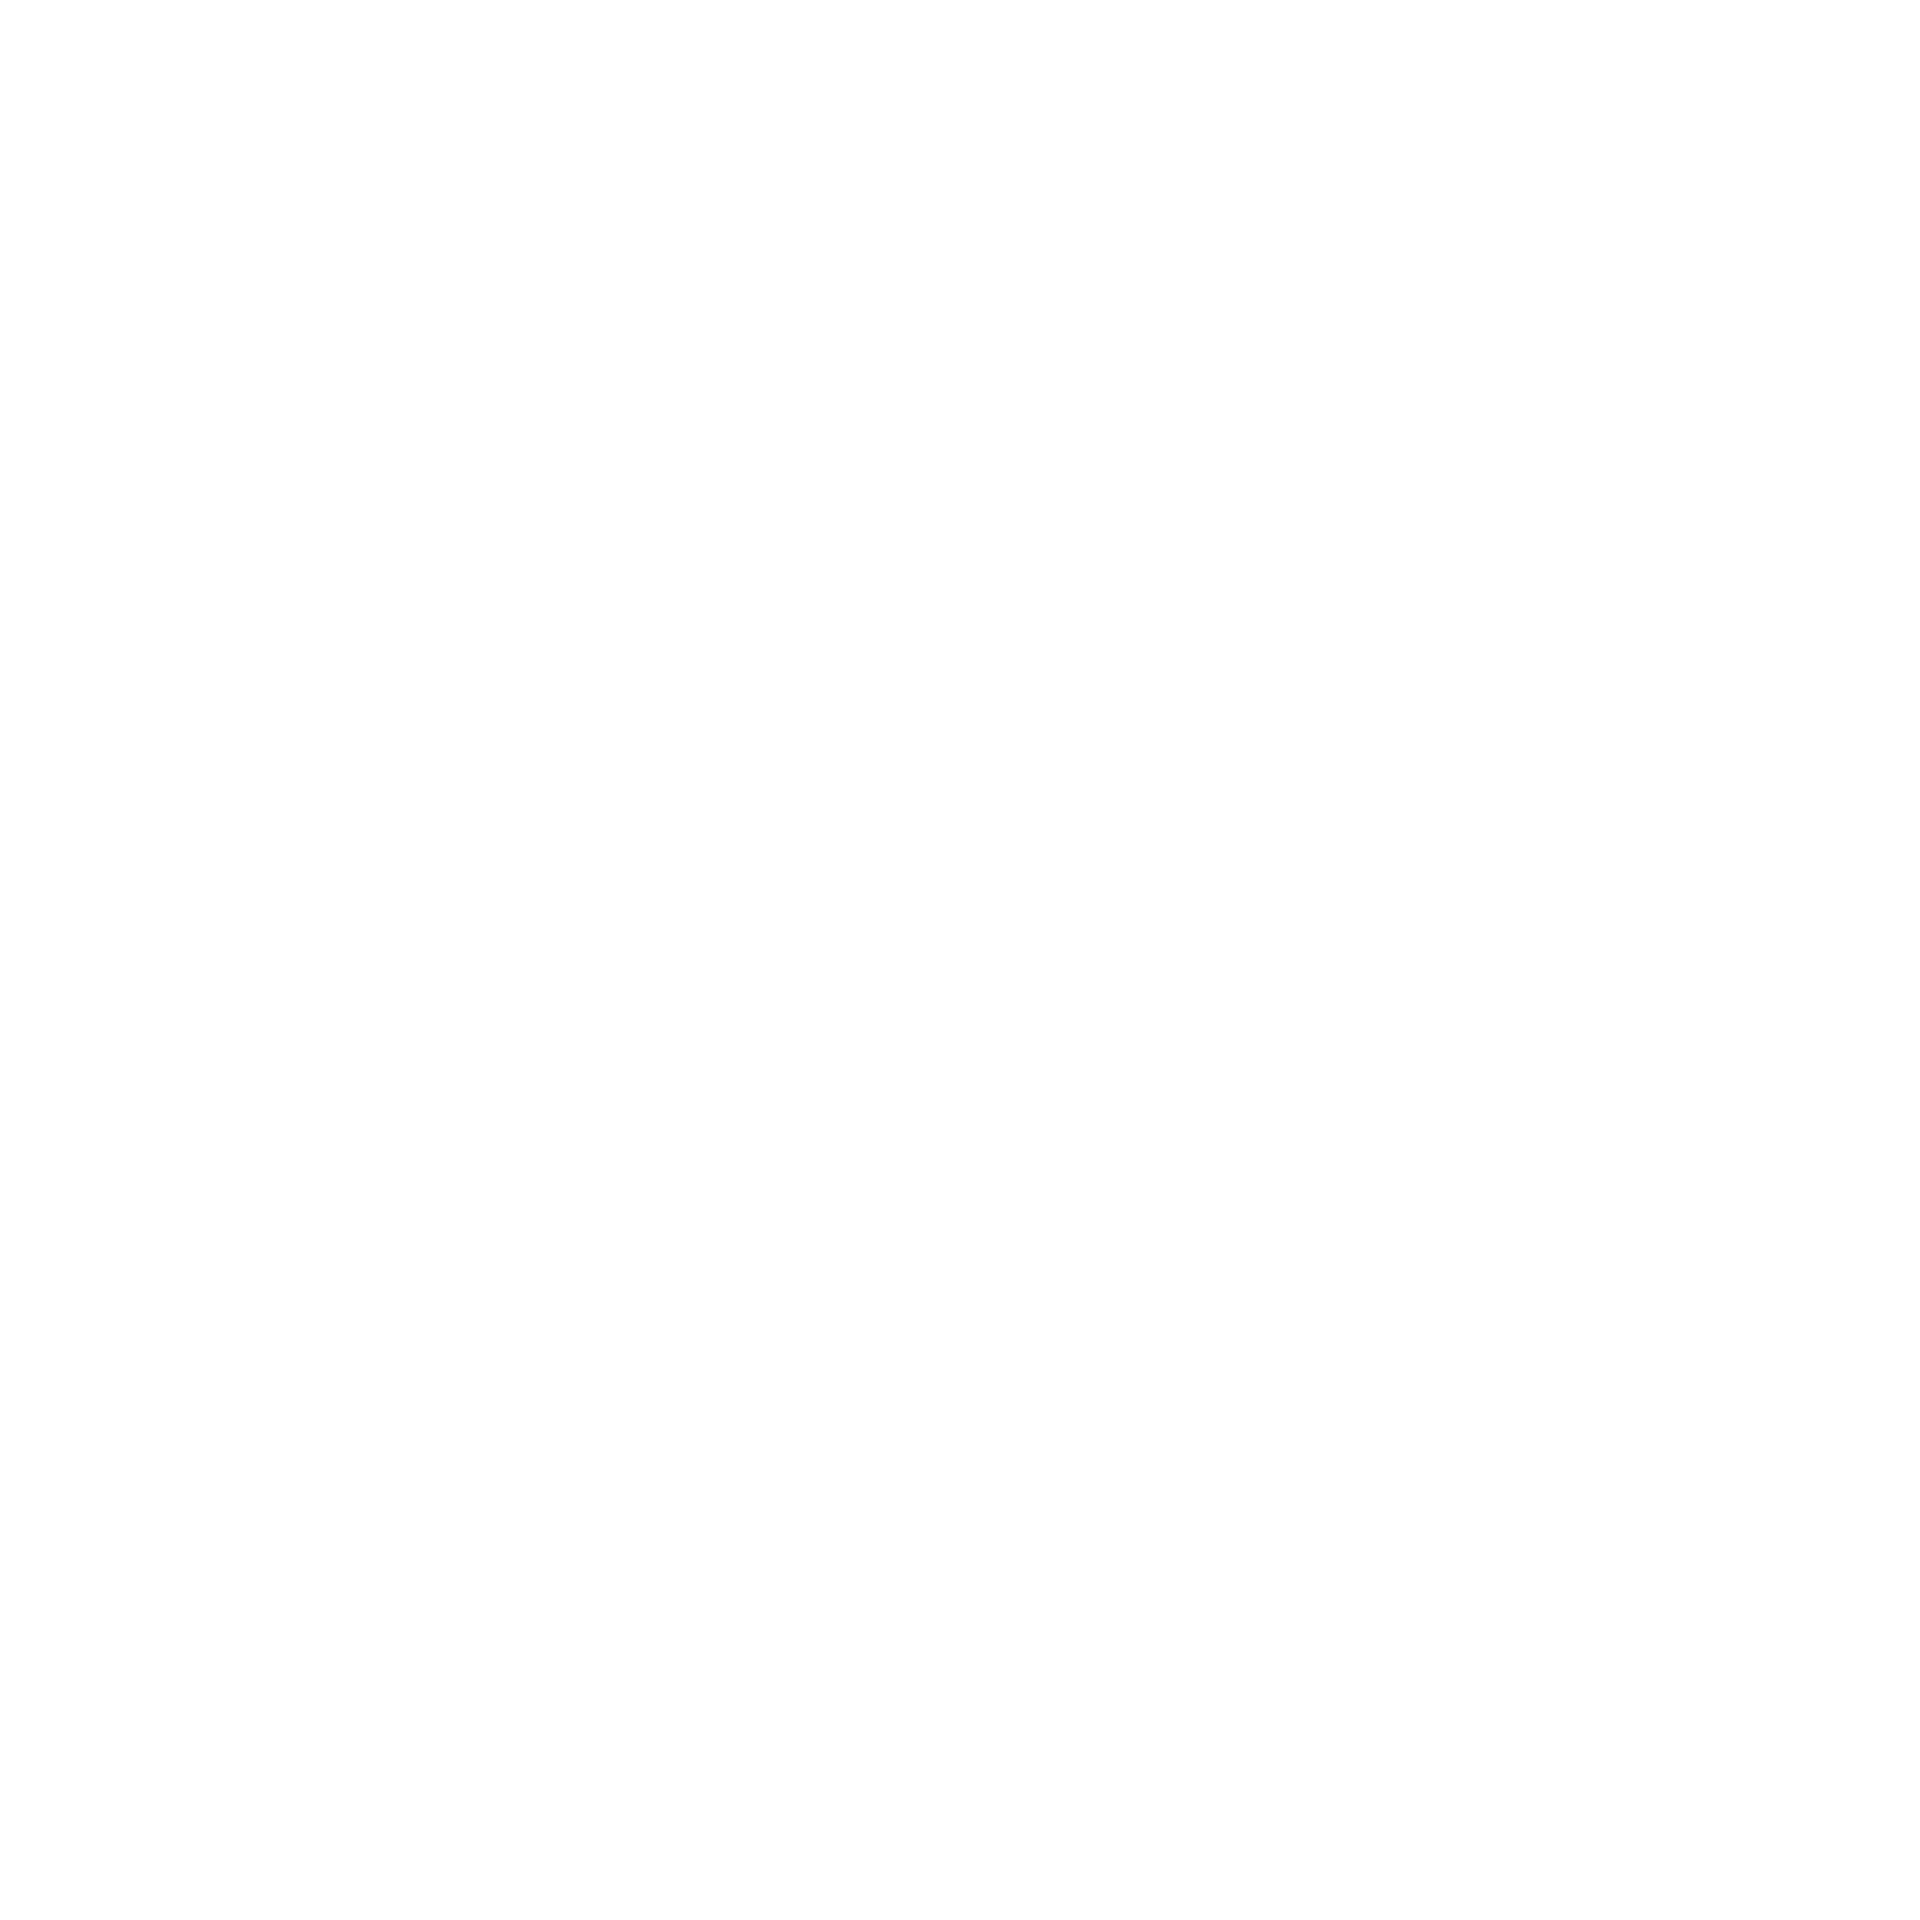 Snacks and Ladders Board Game Cafe logo